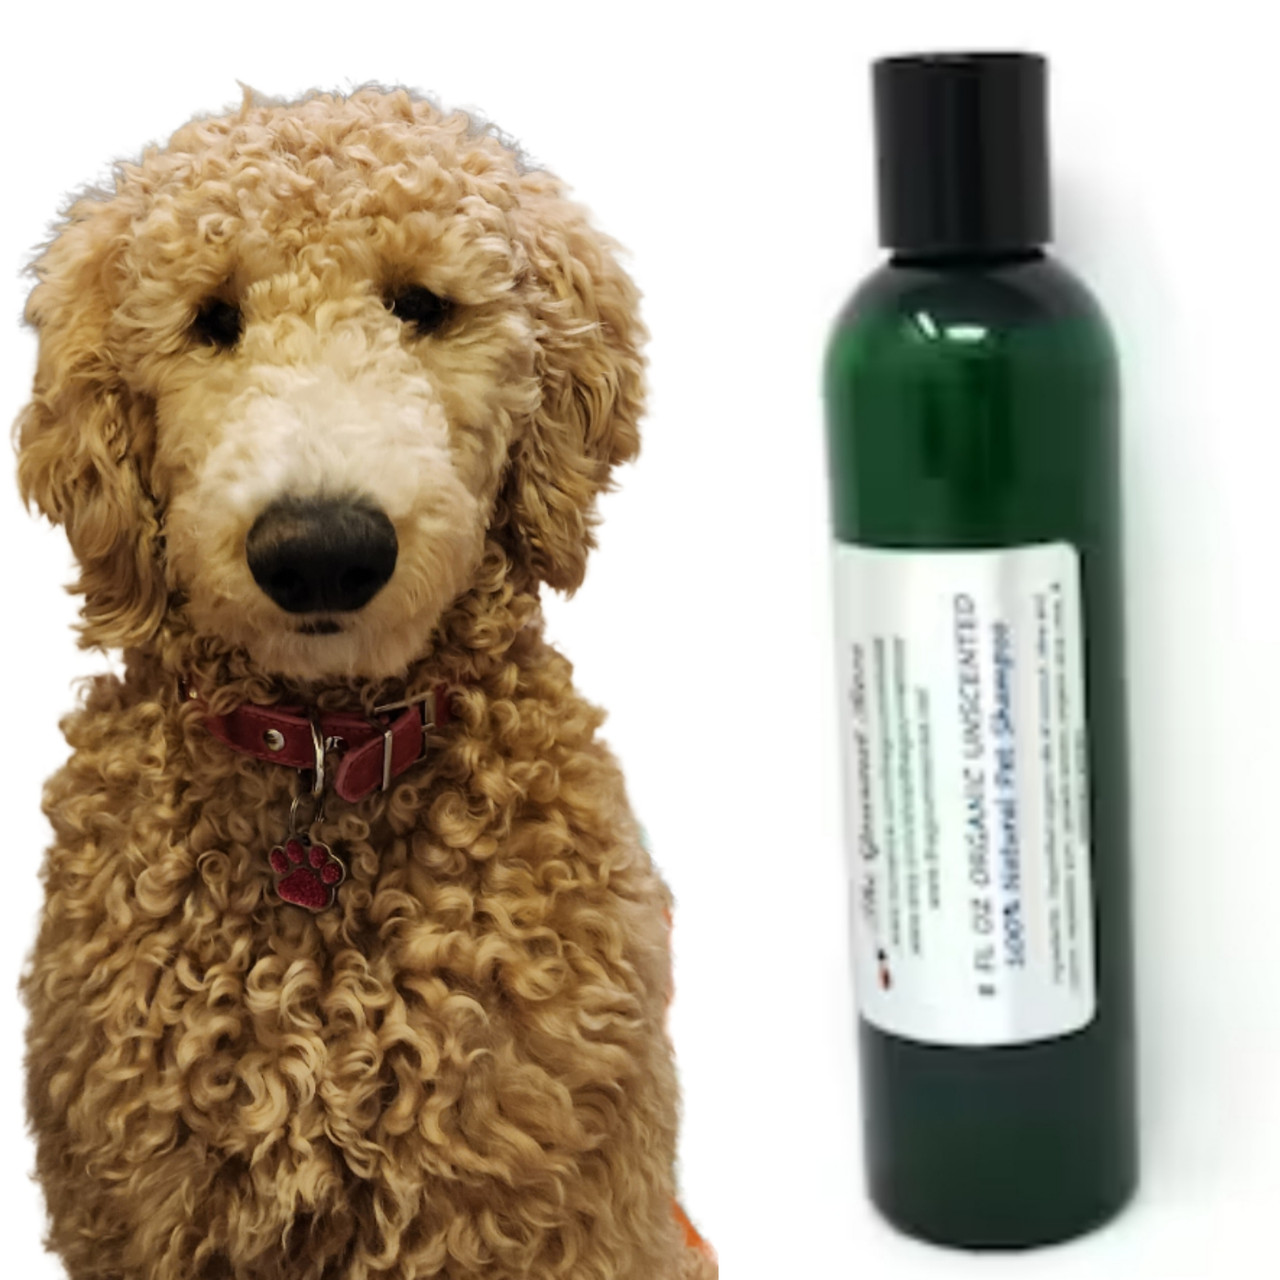 8 oz ORGANIC PEPPERMINT DOG SHAMPOO SOAP Pet Horse Wash 100% All Natural  Cold Processed Process Handmade Herbal Bath Made With Essential Oil BUY 5,  GET 1 FREE! - THE GOURMET ROSE